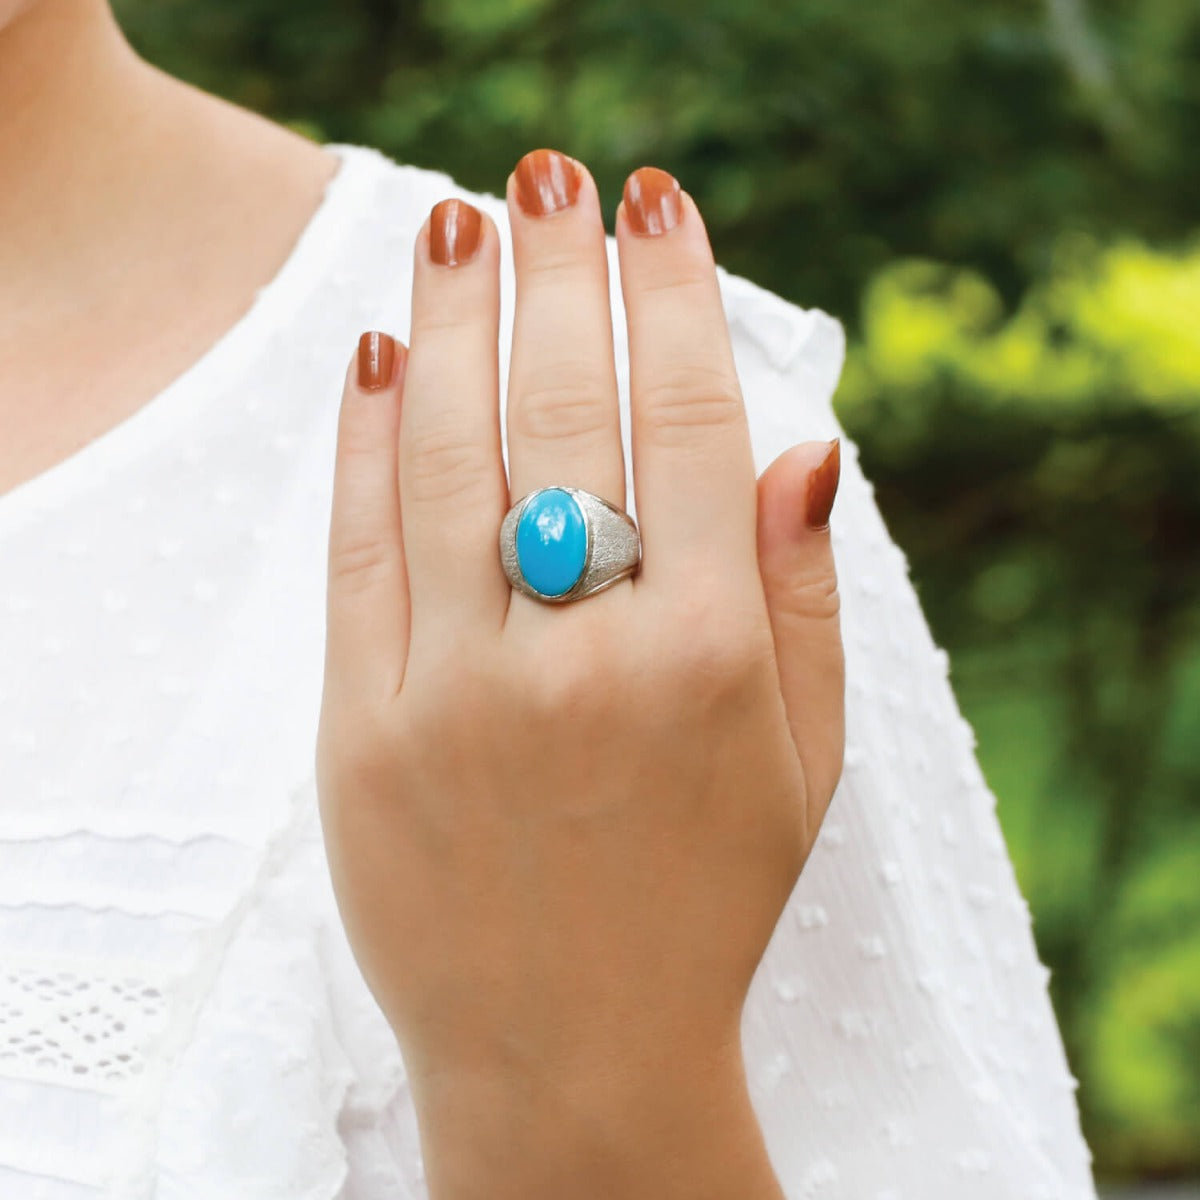 Buy Sterling Silver Simple Oval Genuine Turquoise Ring, Boho Ring, Silver  Ring, Statement Ring, Stone Ring Online in India - Etsy